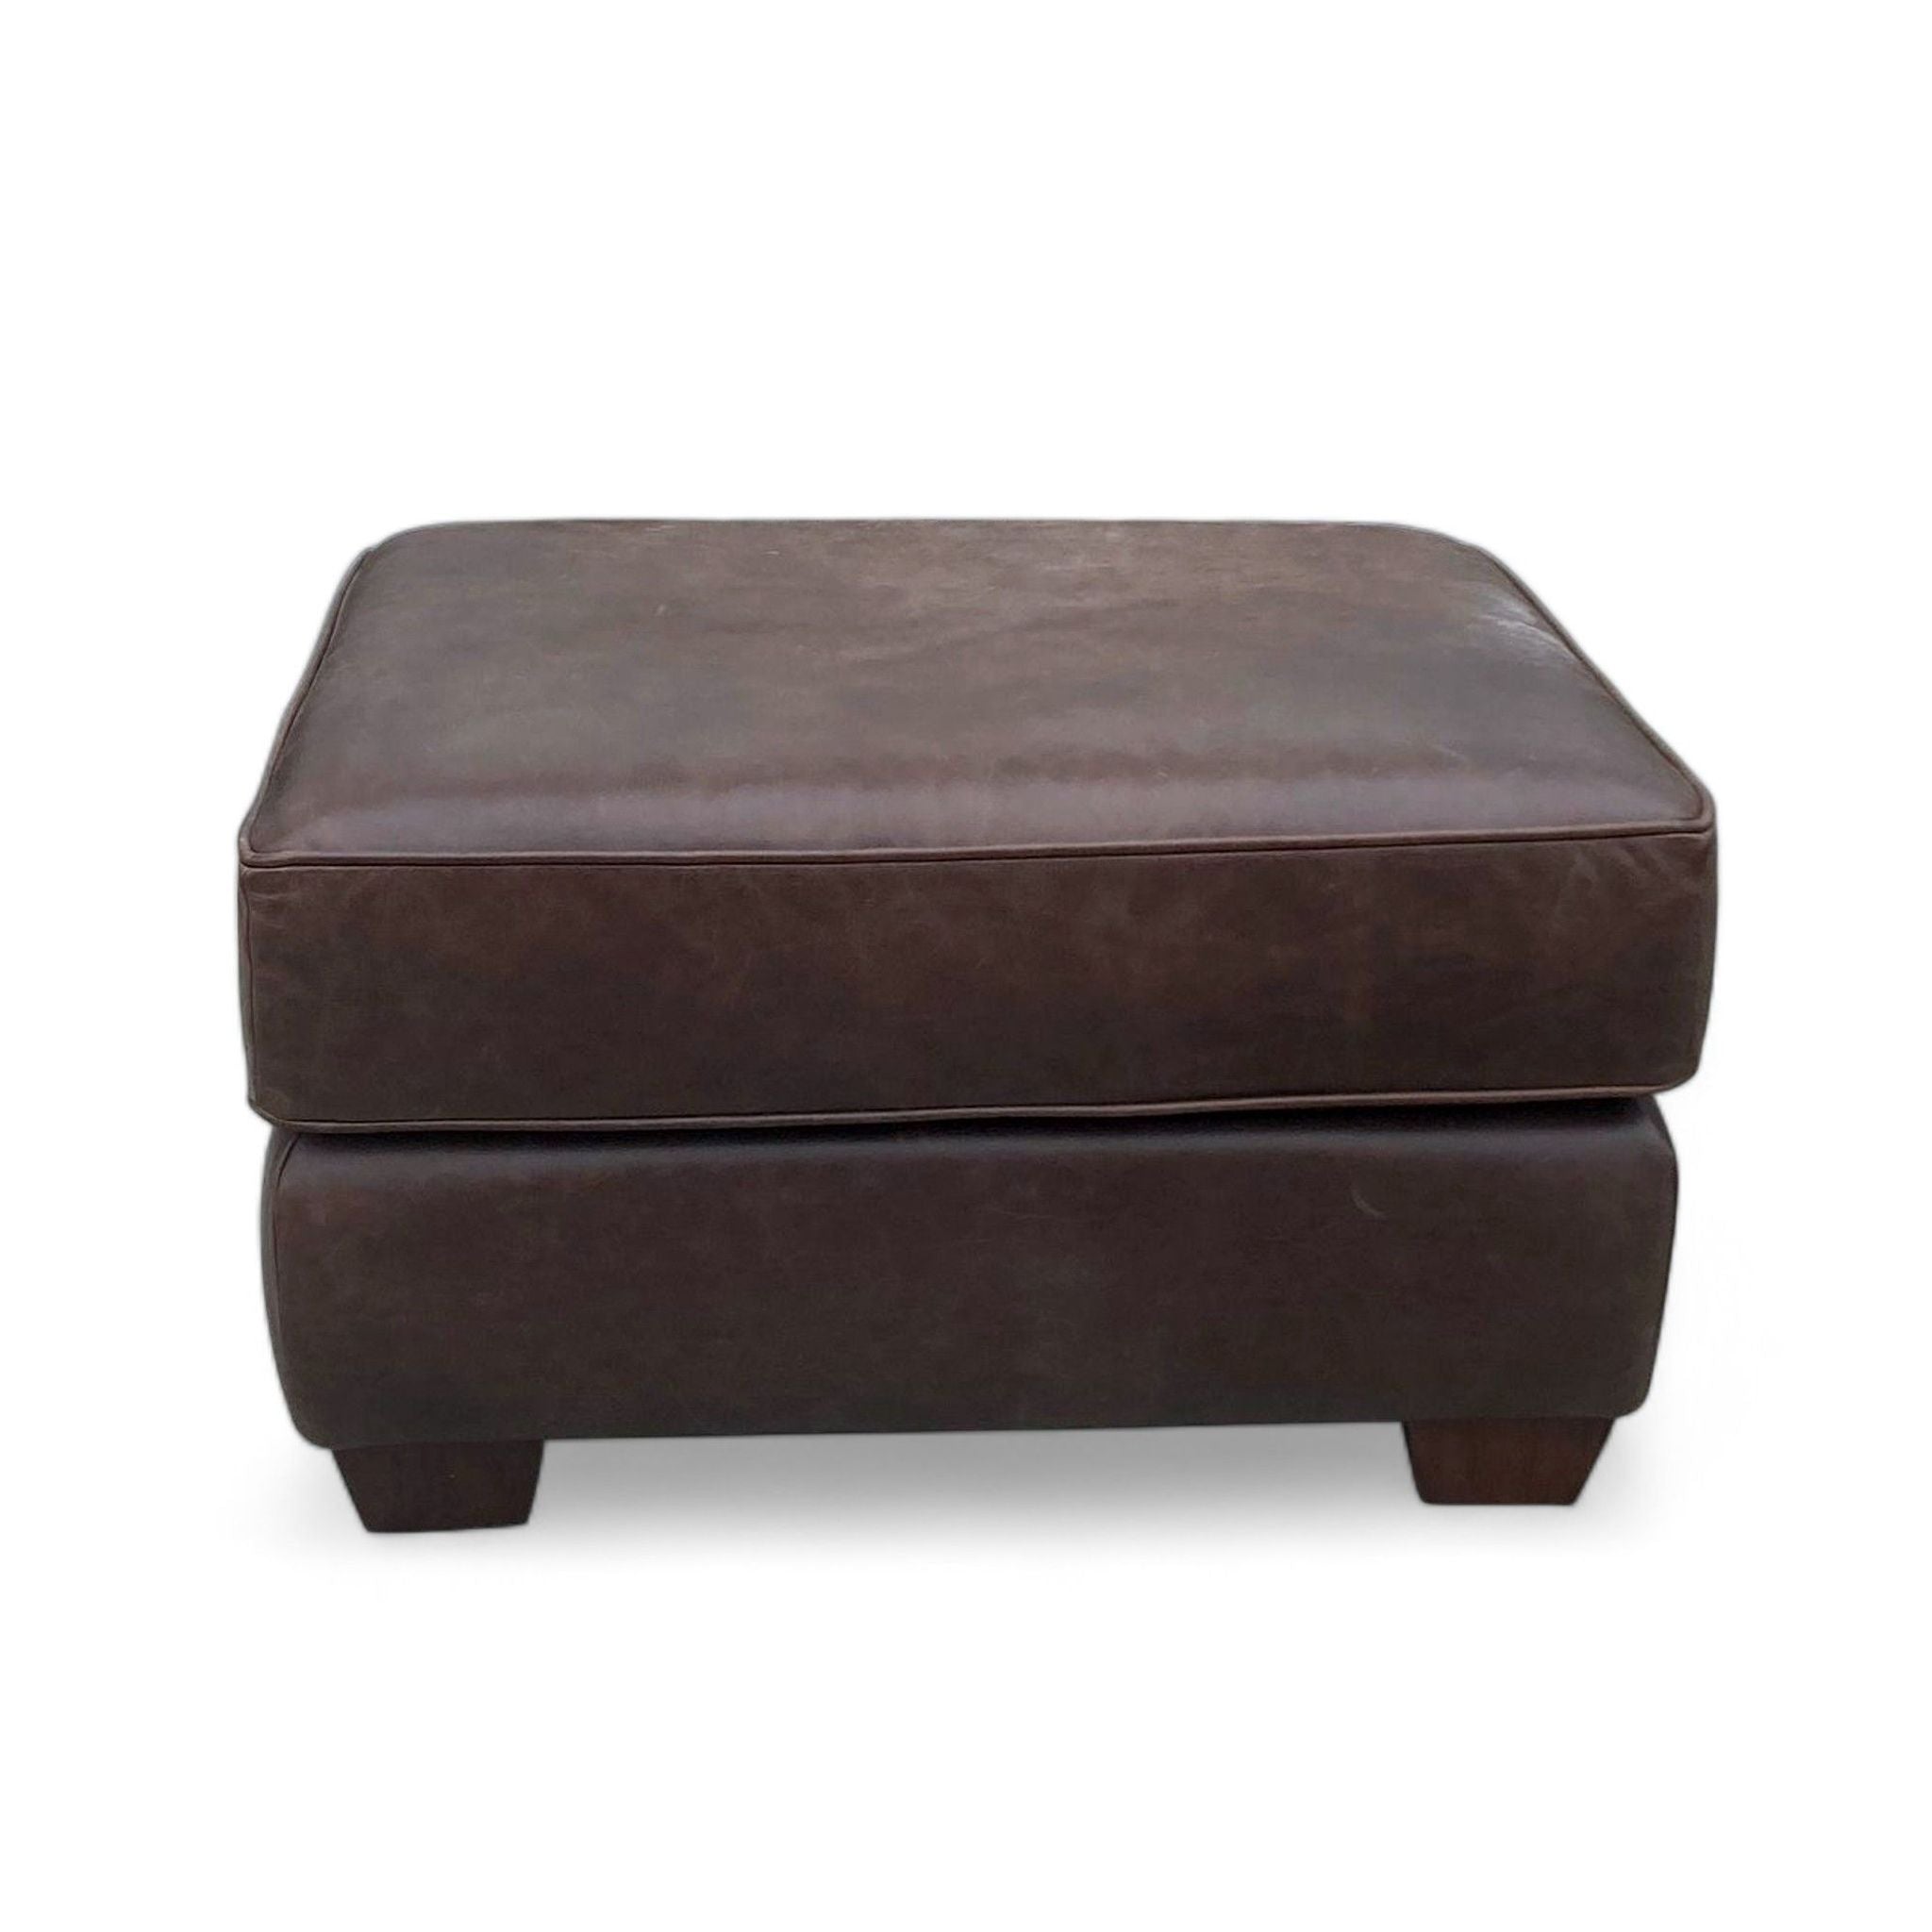 1. "Pottery Barn's Pearce Ottoman in brown leather with dark wood feet, shown against a neutral background."